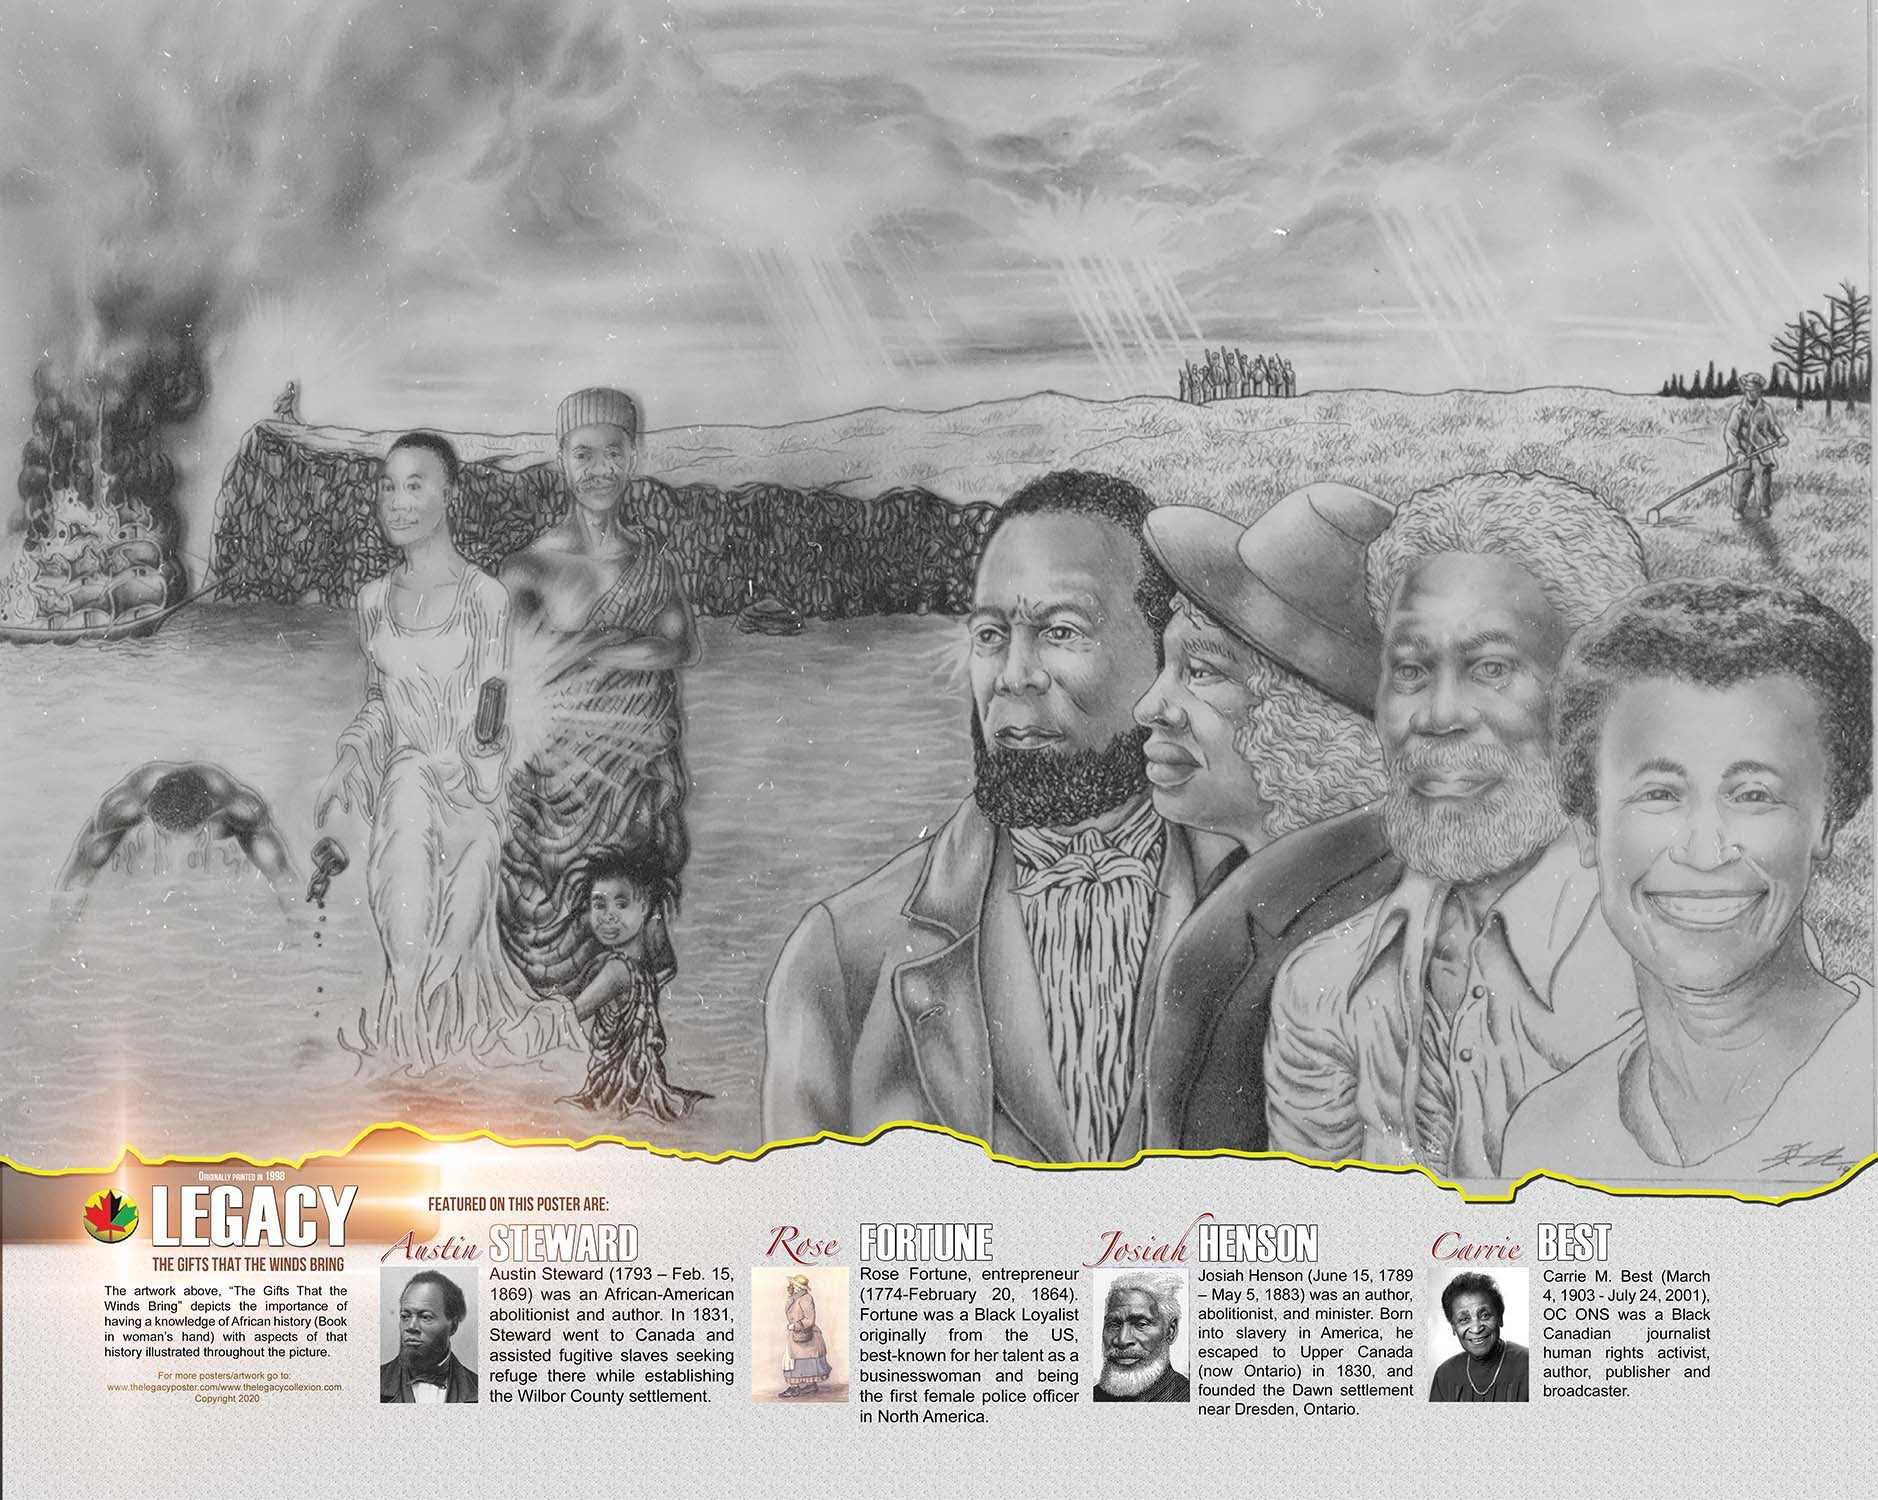 “An educational poster, ideal for Black History Month featuring community builder Austin Steward, the first Black police woman Rose Fortune, community builder Josiah Henson and journalist Carrie Best created by African-Canadian artist Robert Small.”